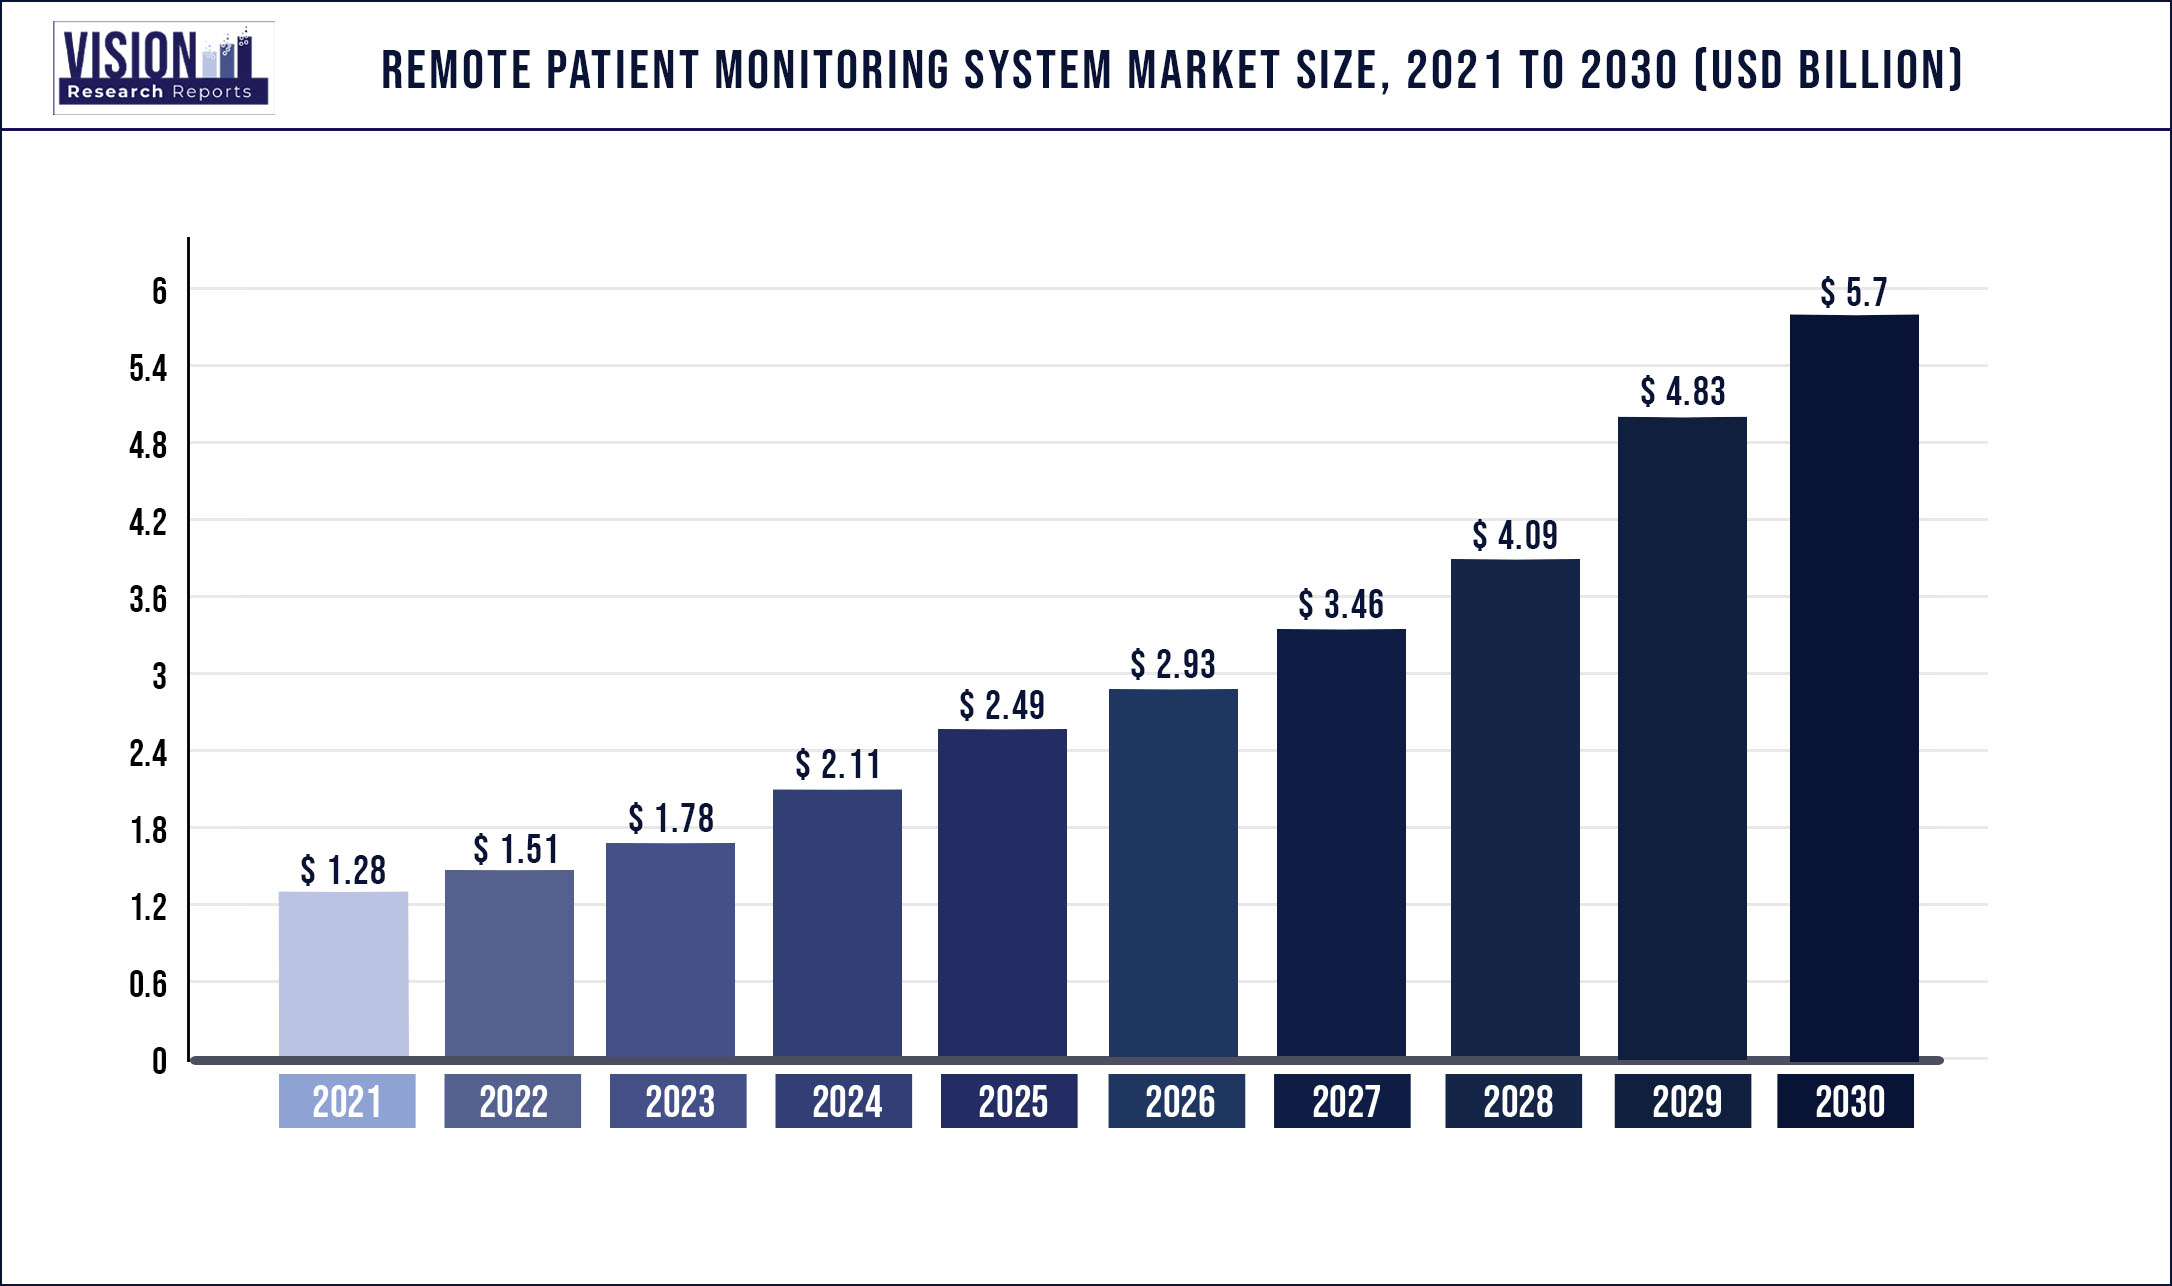 Remote Patient Monitoring System Market Size 2021 to 2030